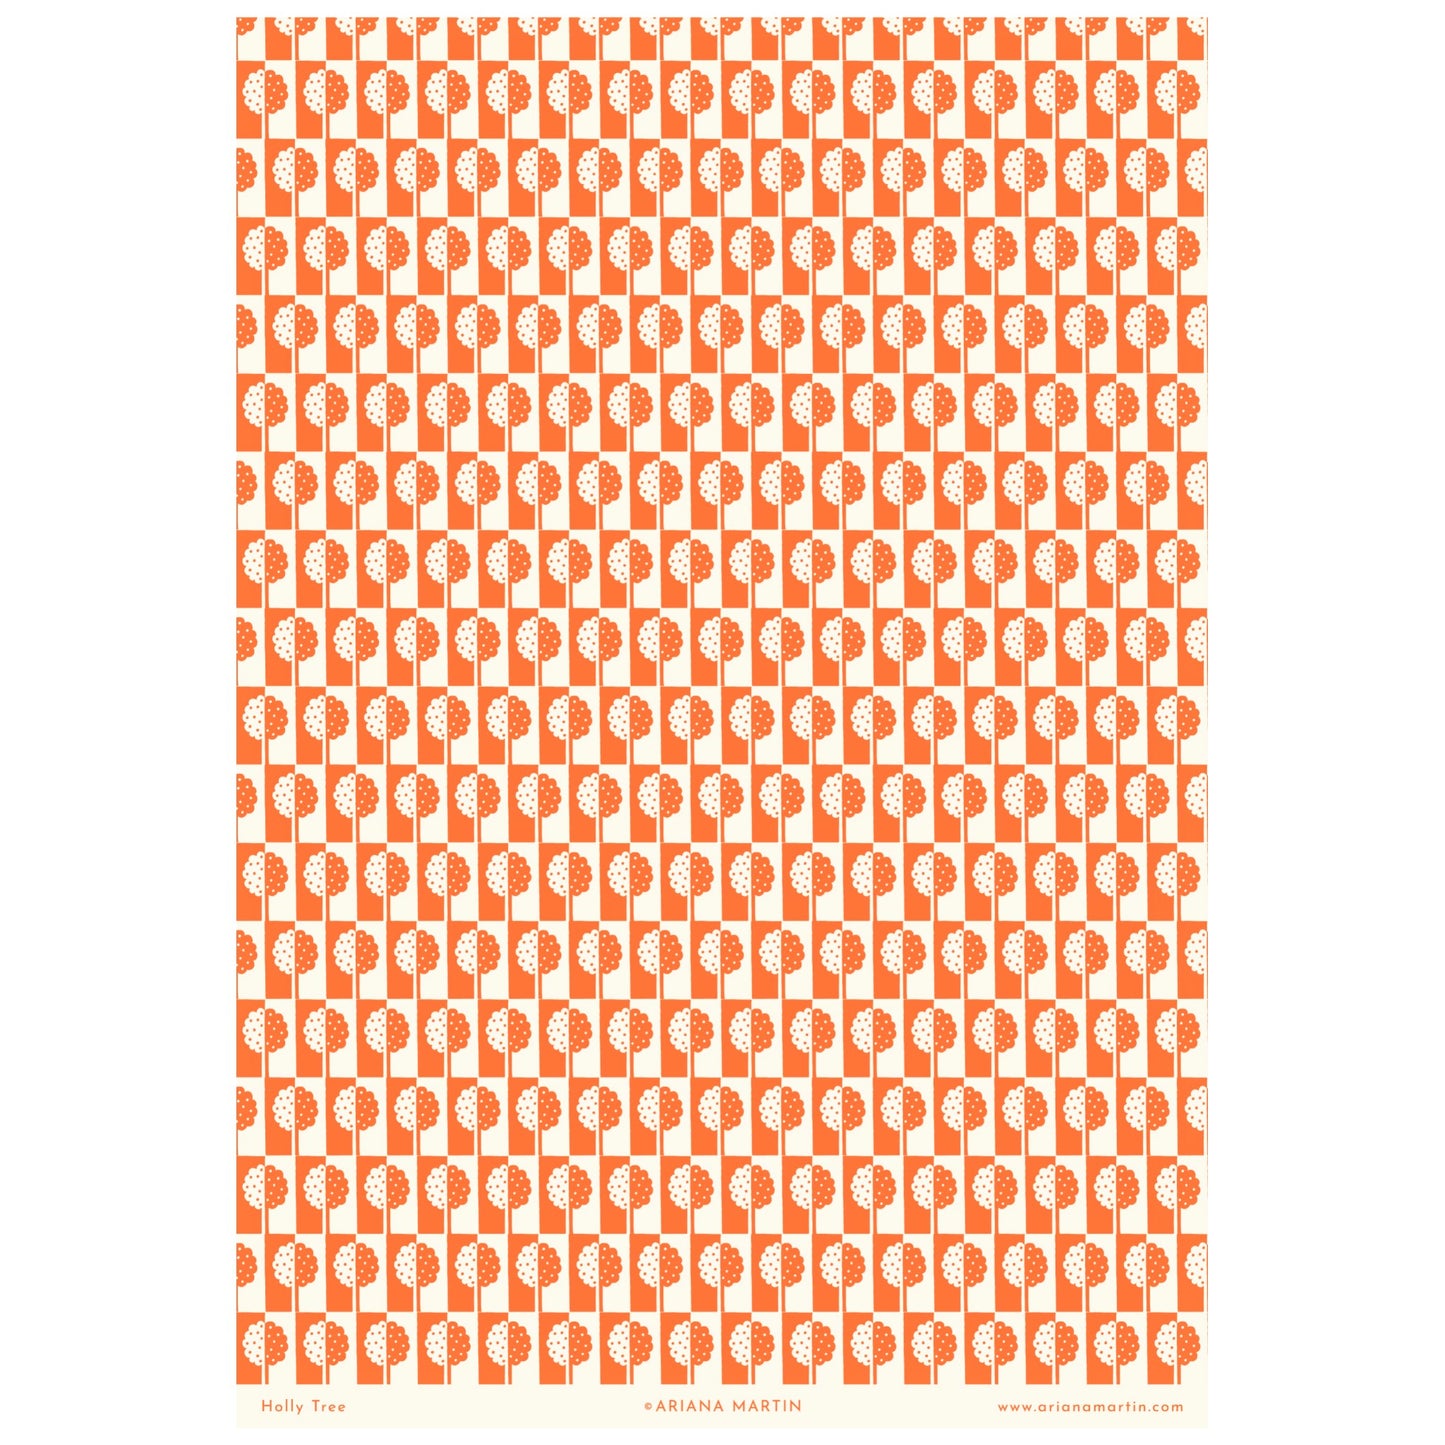 patterned paper, gift wrap, with all-over holly tree design in bright orange and white, by Ariana Martin, full sheet view